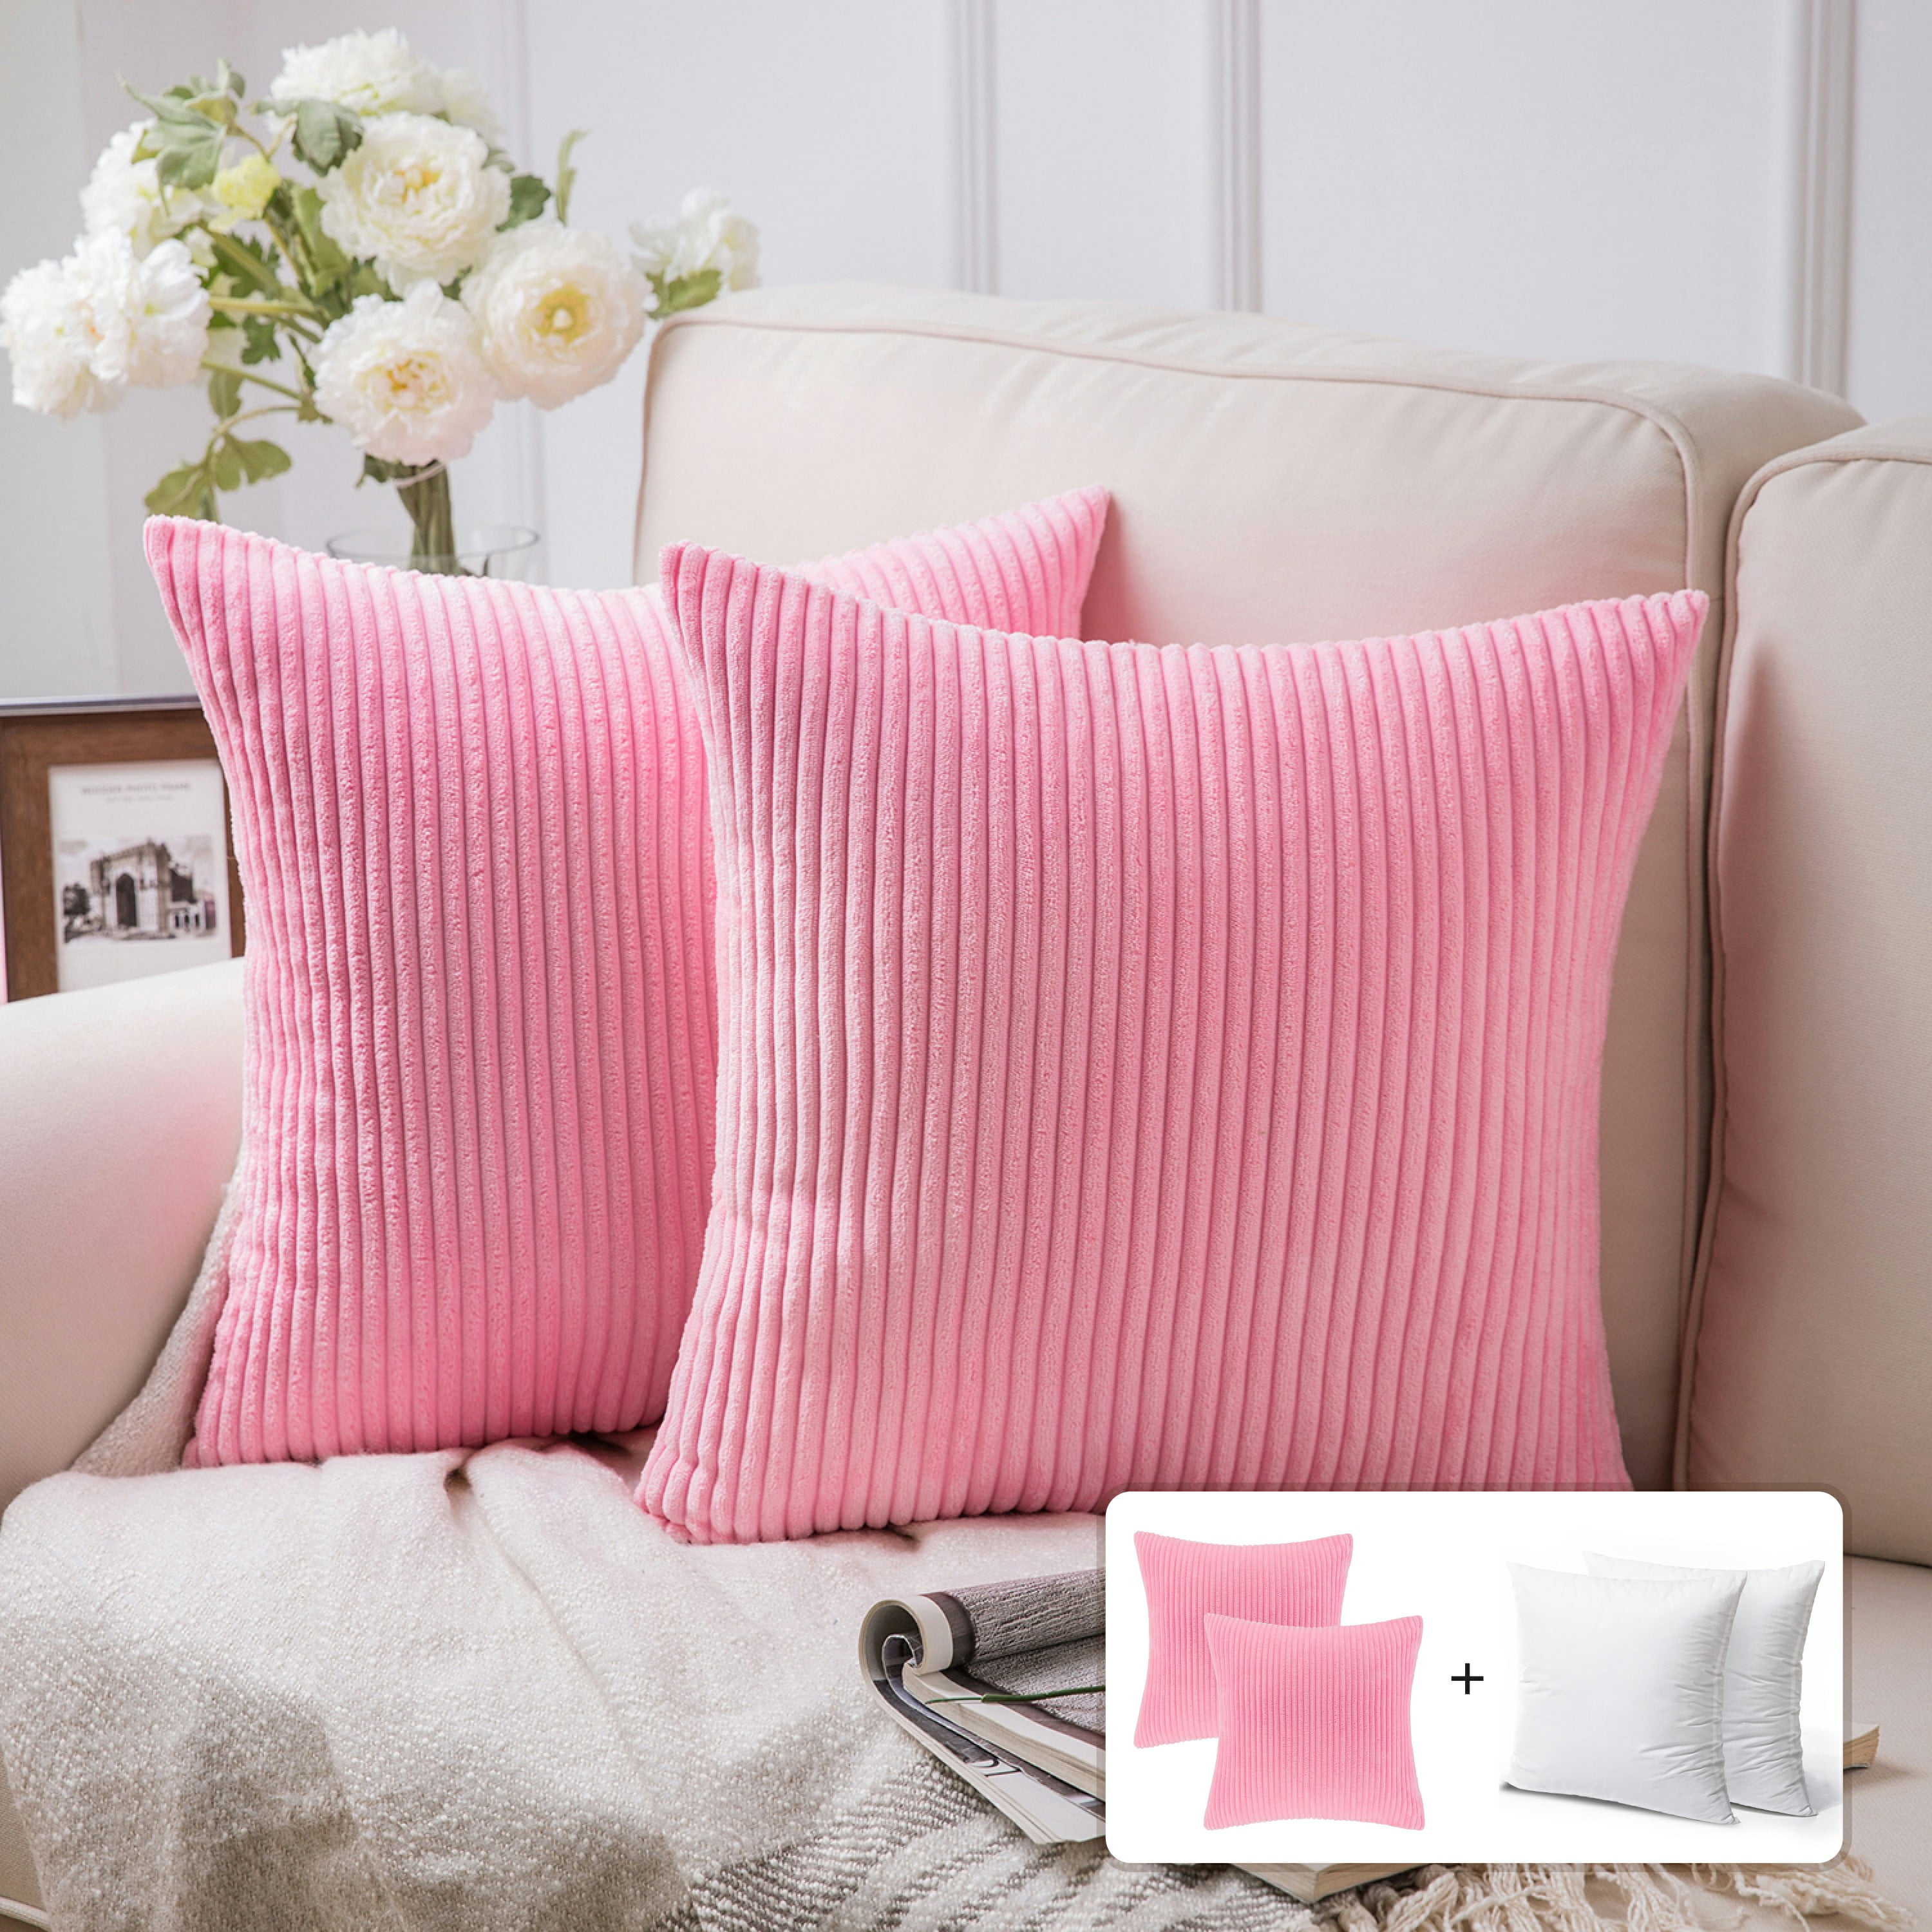 Fluffy Corduroy Velvet Solid Color Suqare Cusion Accent Decorative Throw Pillow for Couch, 18 inch x 18 inch, Pink, 2 Pack